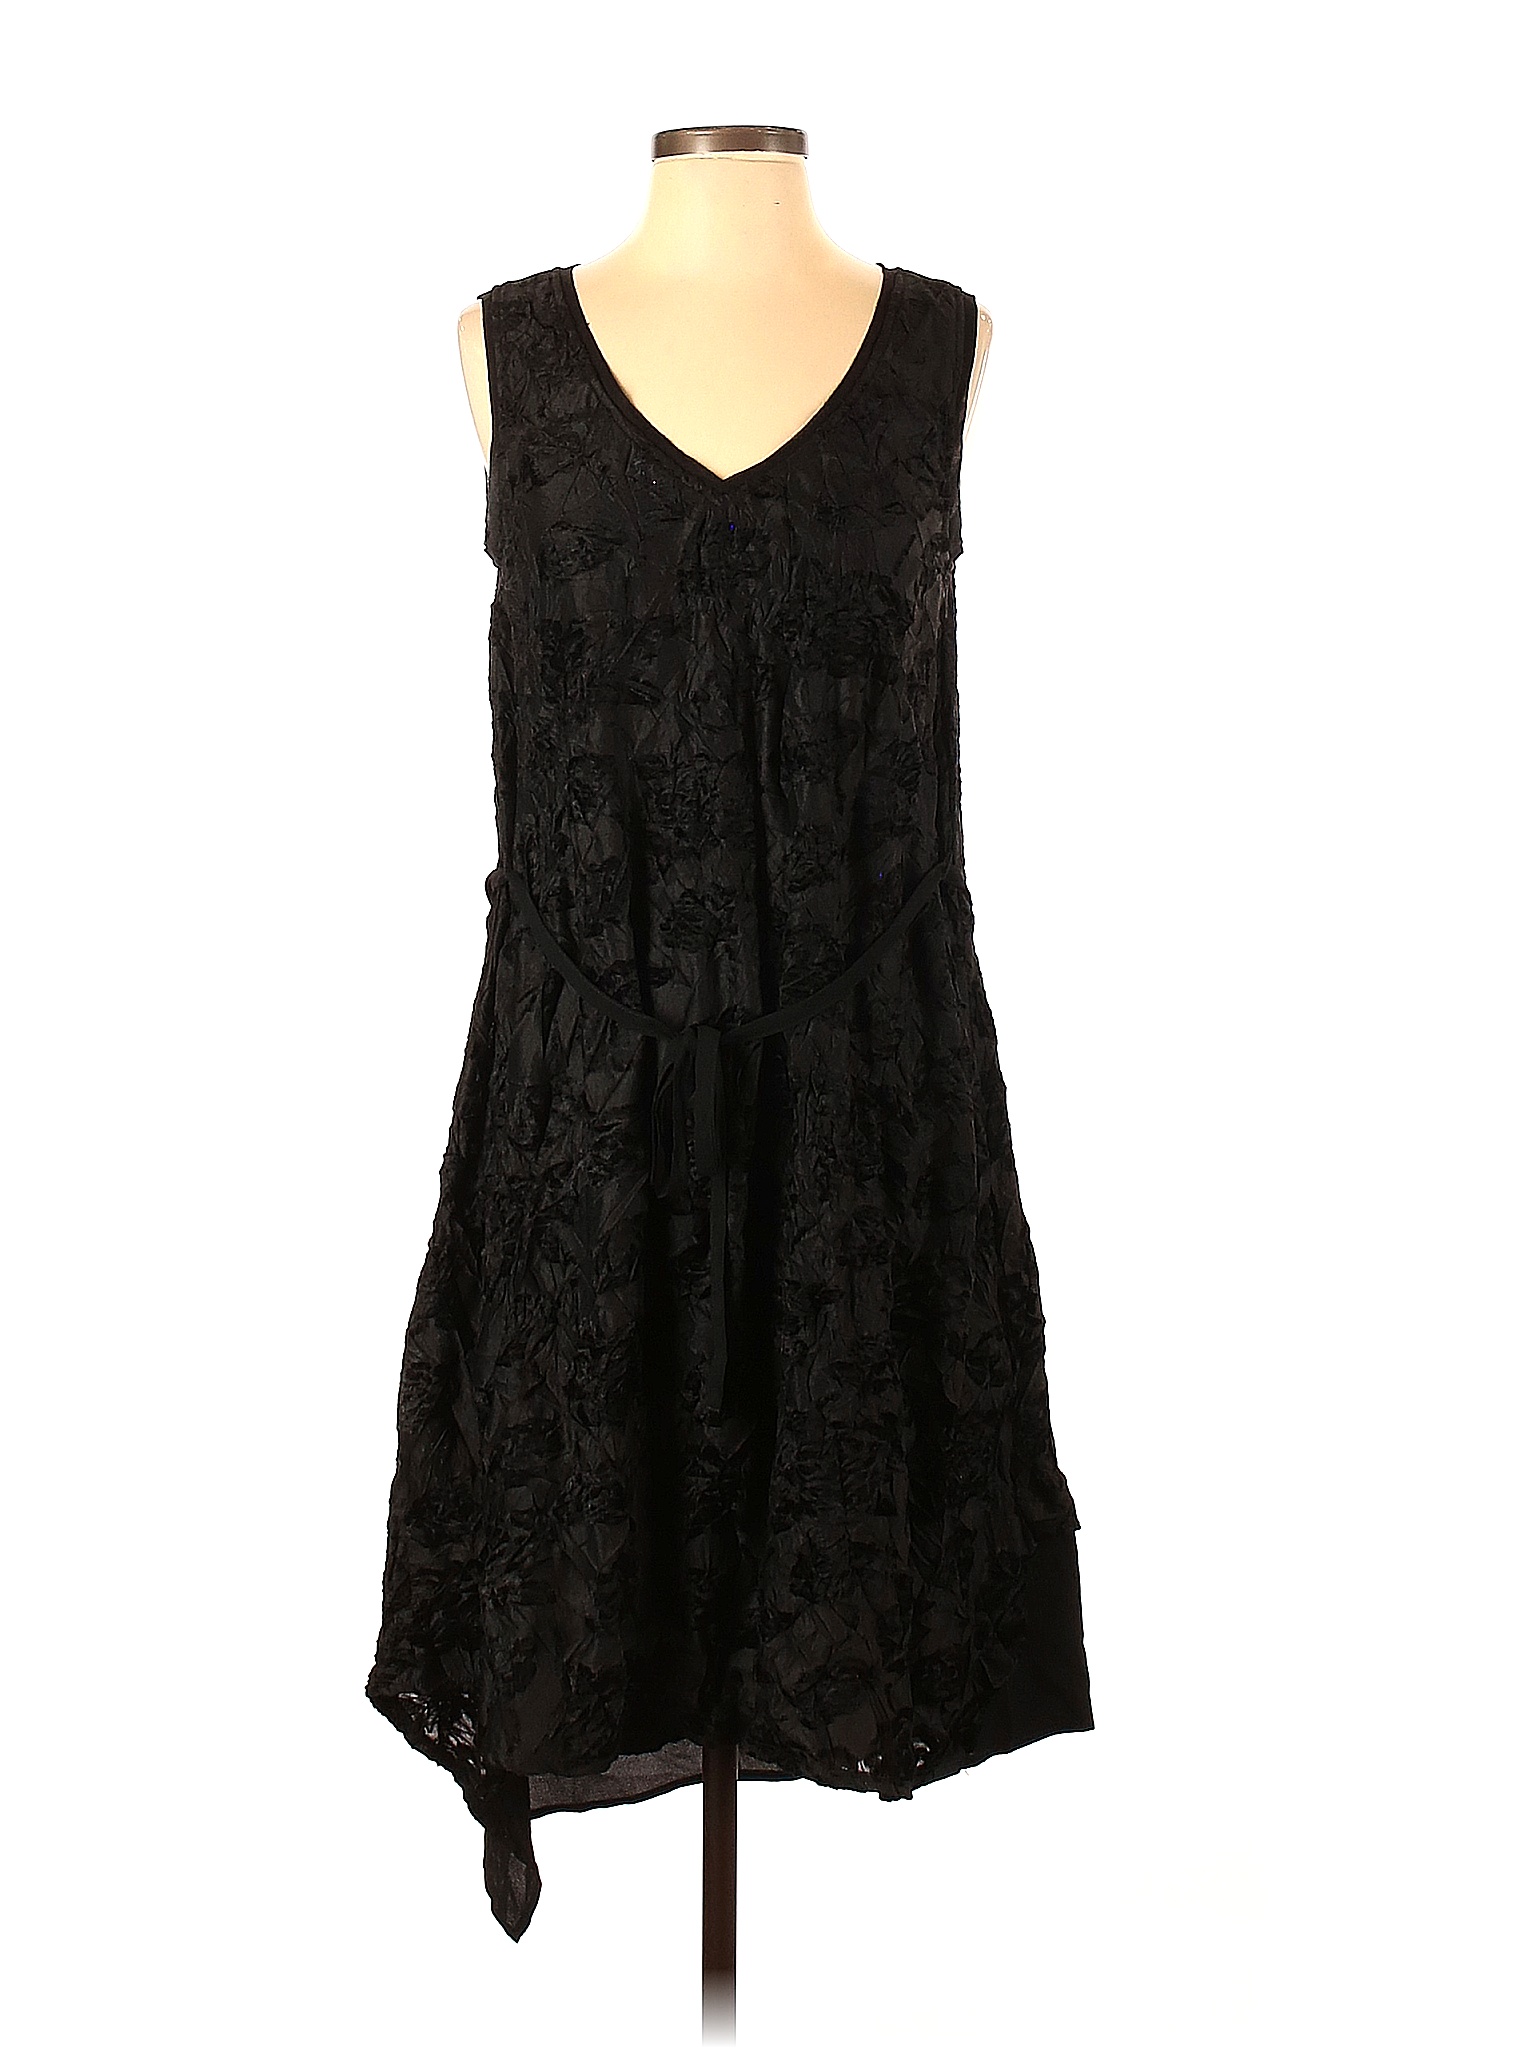 Simply Vera Vera Wang 100% Polyester Solid Black Casual Dress Size S ...